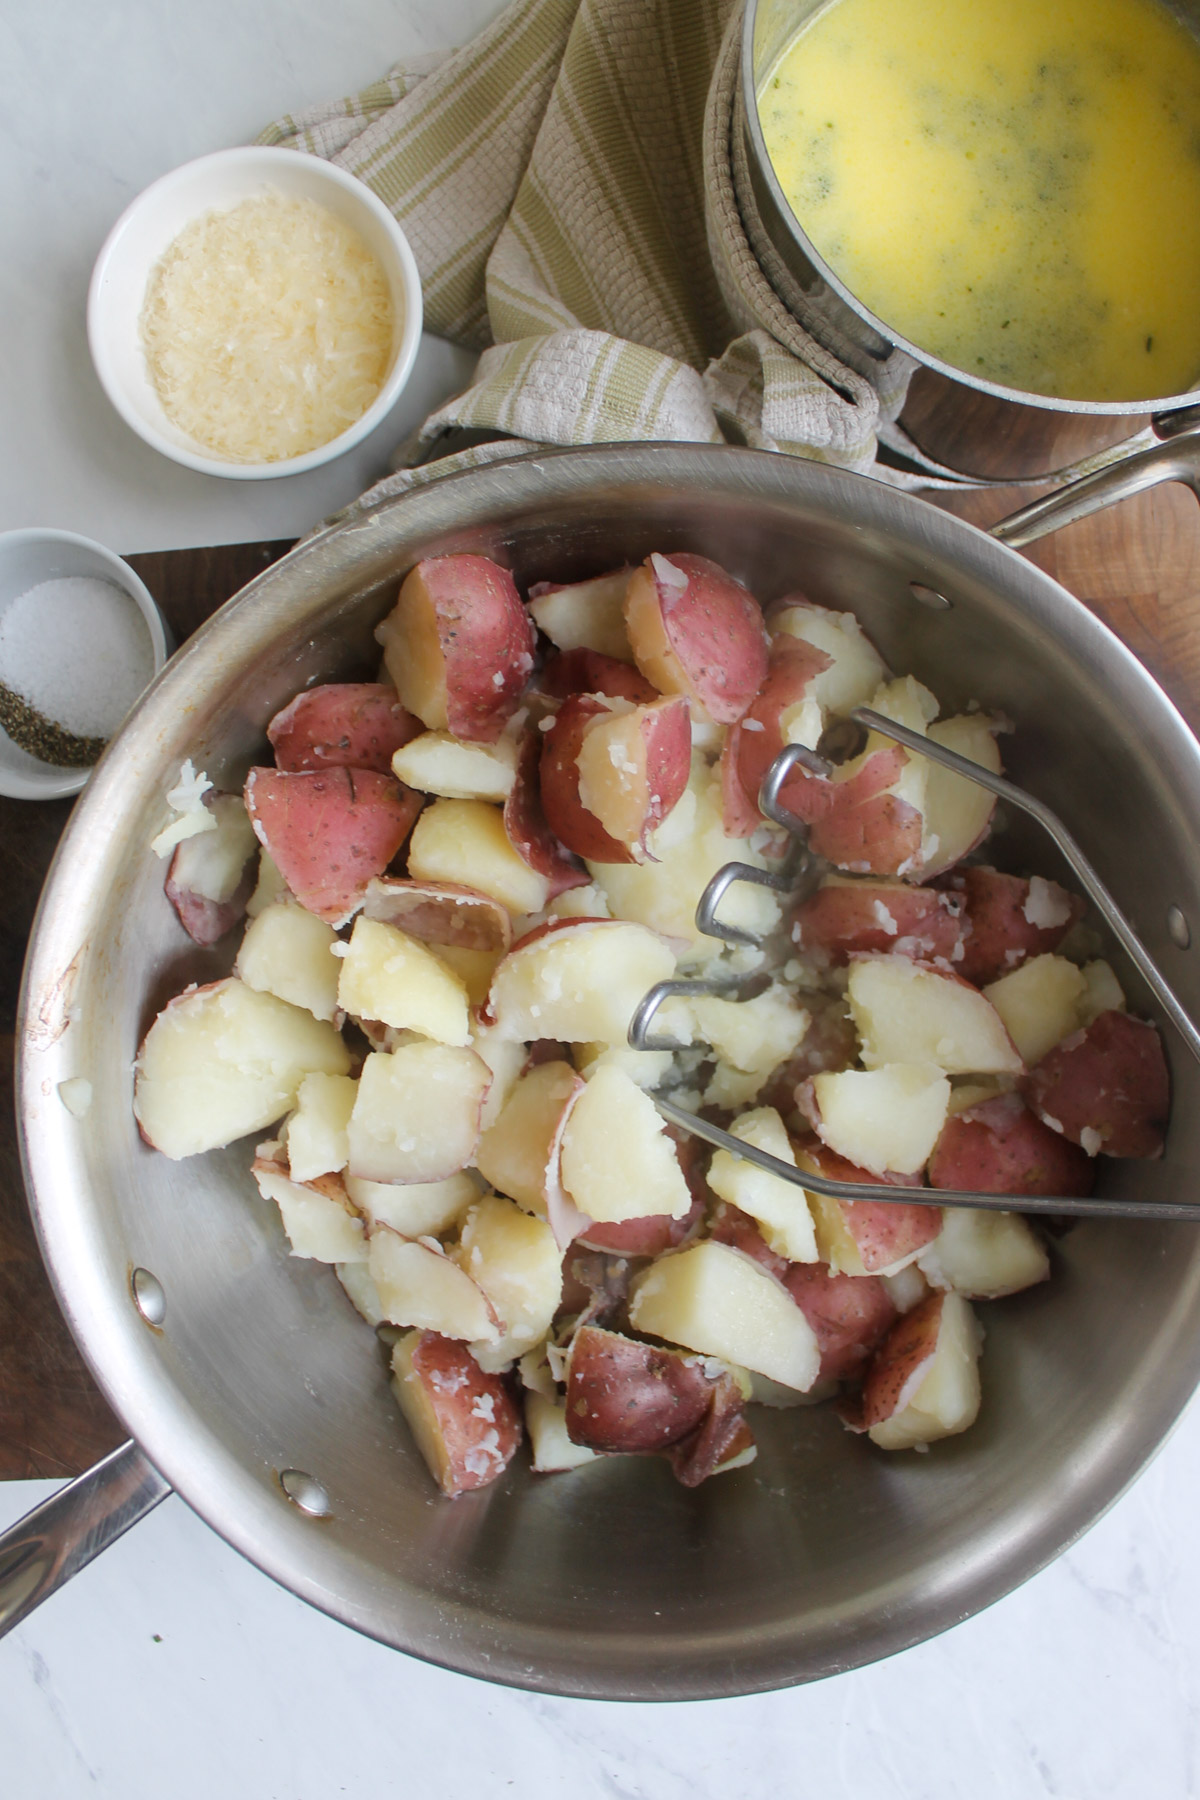 A pot of drained boiled potatoes ready to add garlic herb butter and half and half to mash.